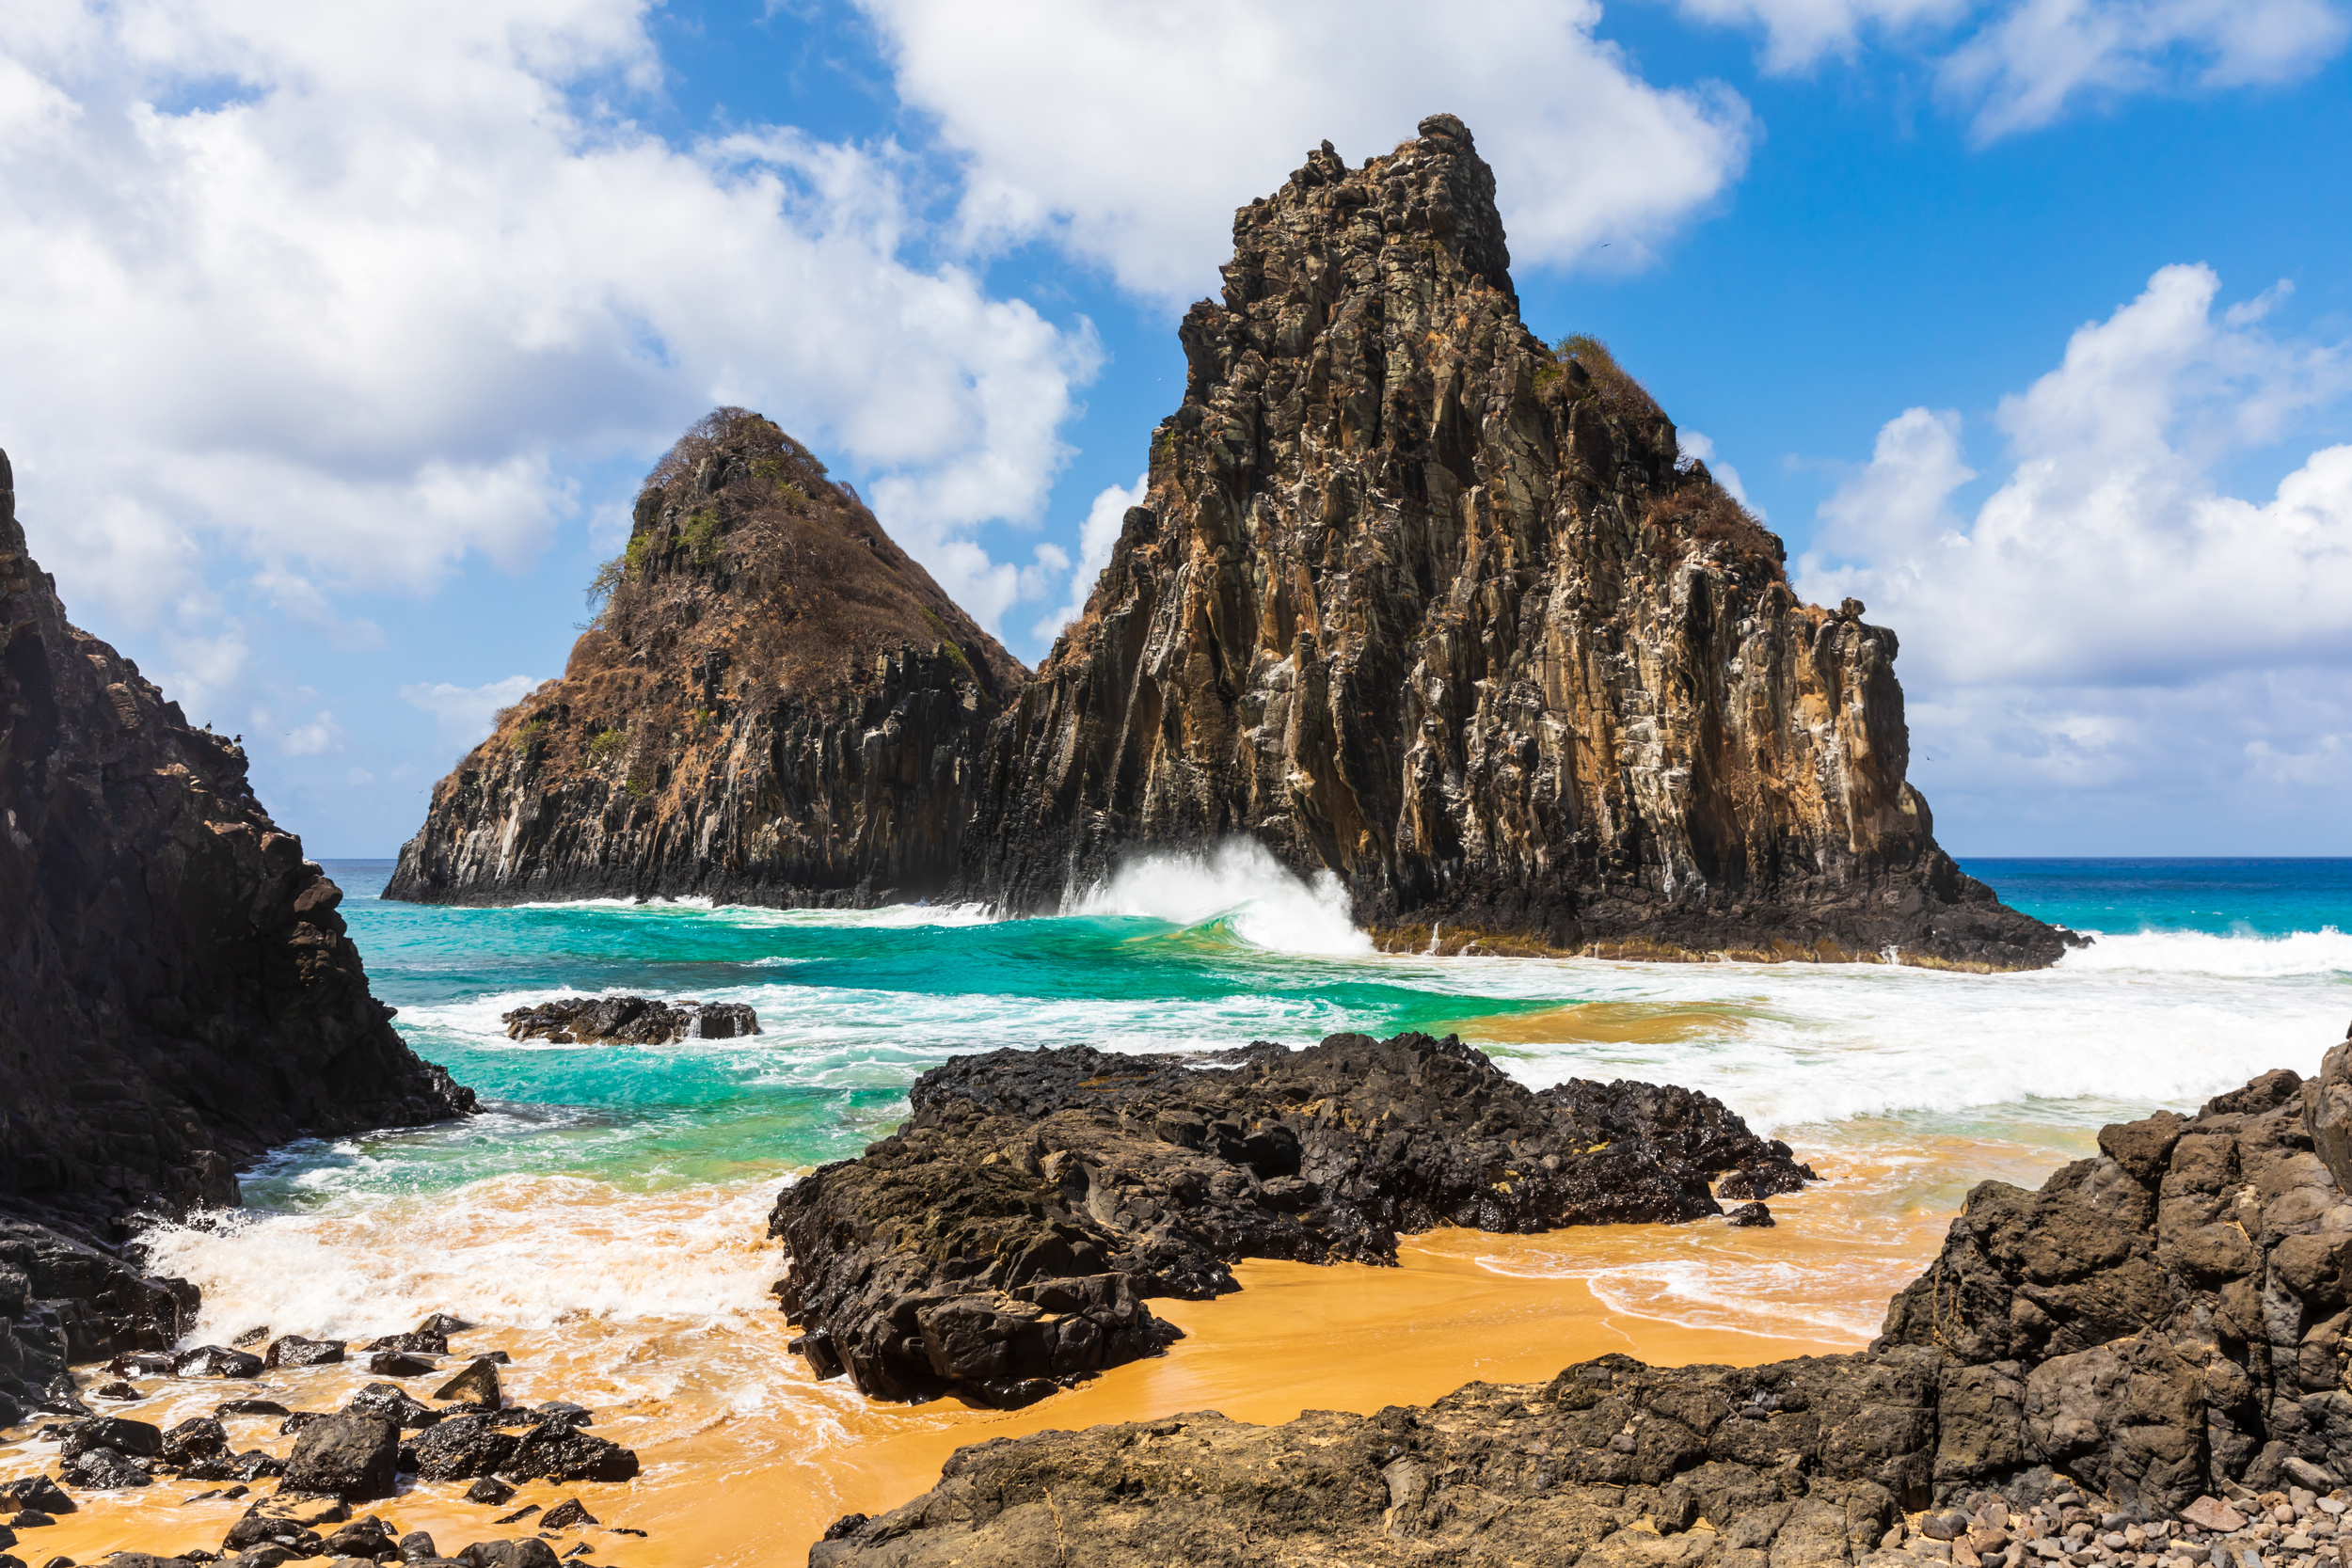 <p>Fernando de Noronha, off the coast of Brazil, is actually an archipelago, so if you make it all the way to the remote location, you can see more than one island. You’ll also see lots of beautiful wild- and sea life, stunning beaches and crystal clear waters. </p><p><a href='https://www.msn.com/en-us/community/channel/vid-cj9pqbr0vn9in2b6ddcd8sfgpfq6x6utp44fssrv6mc2gtybw0us'>Follow us on MSN to see more of our exclusive lifestyle content.</a></p>